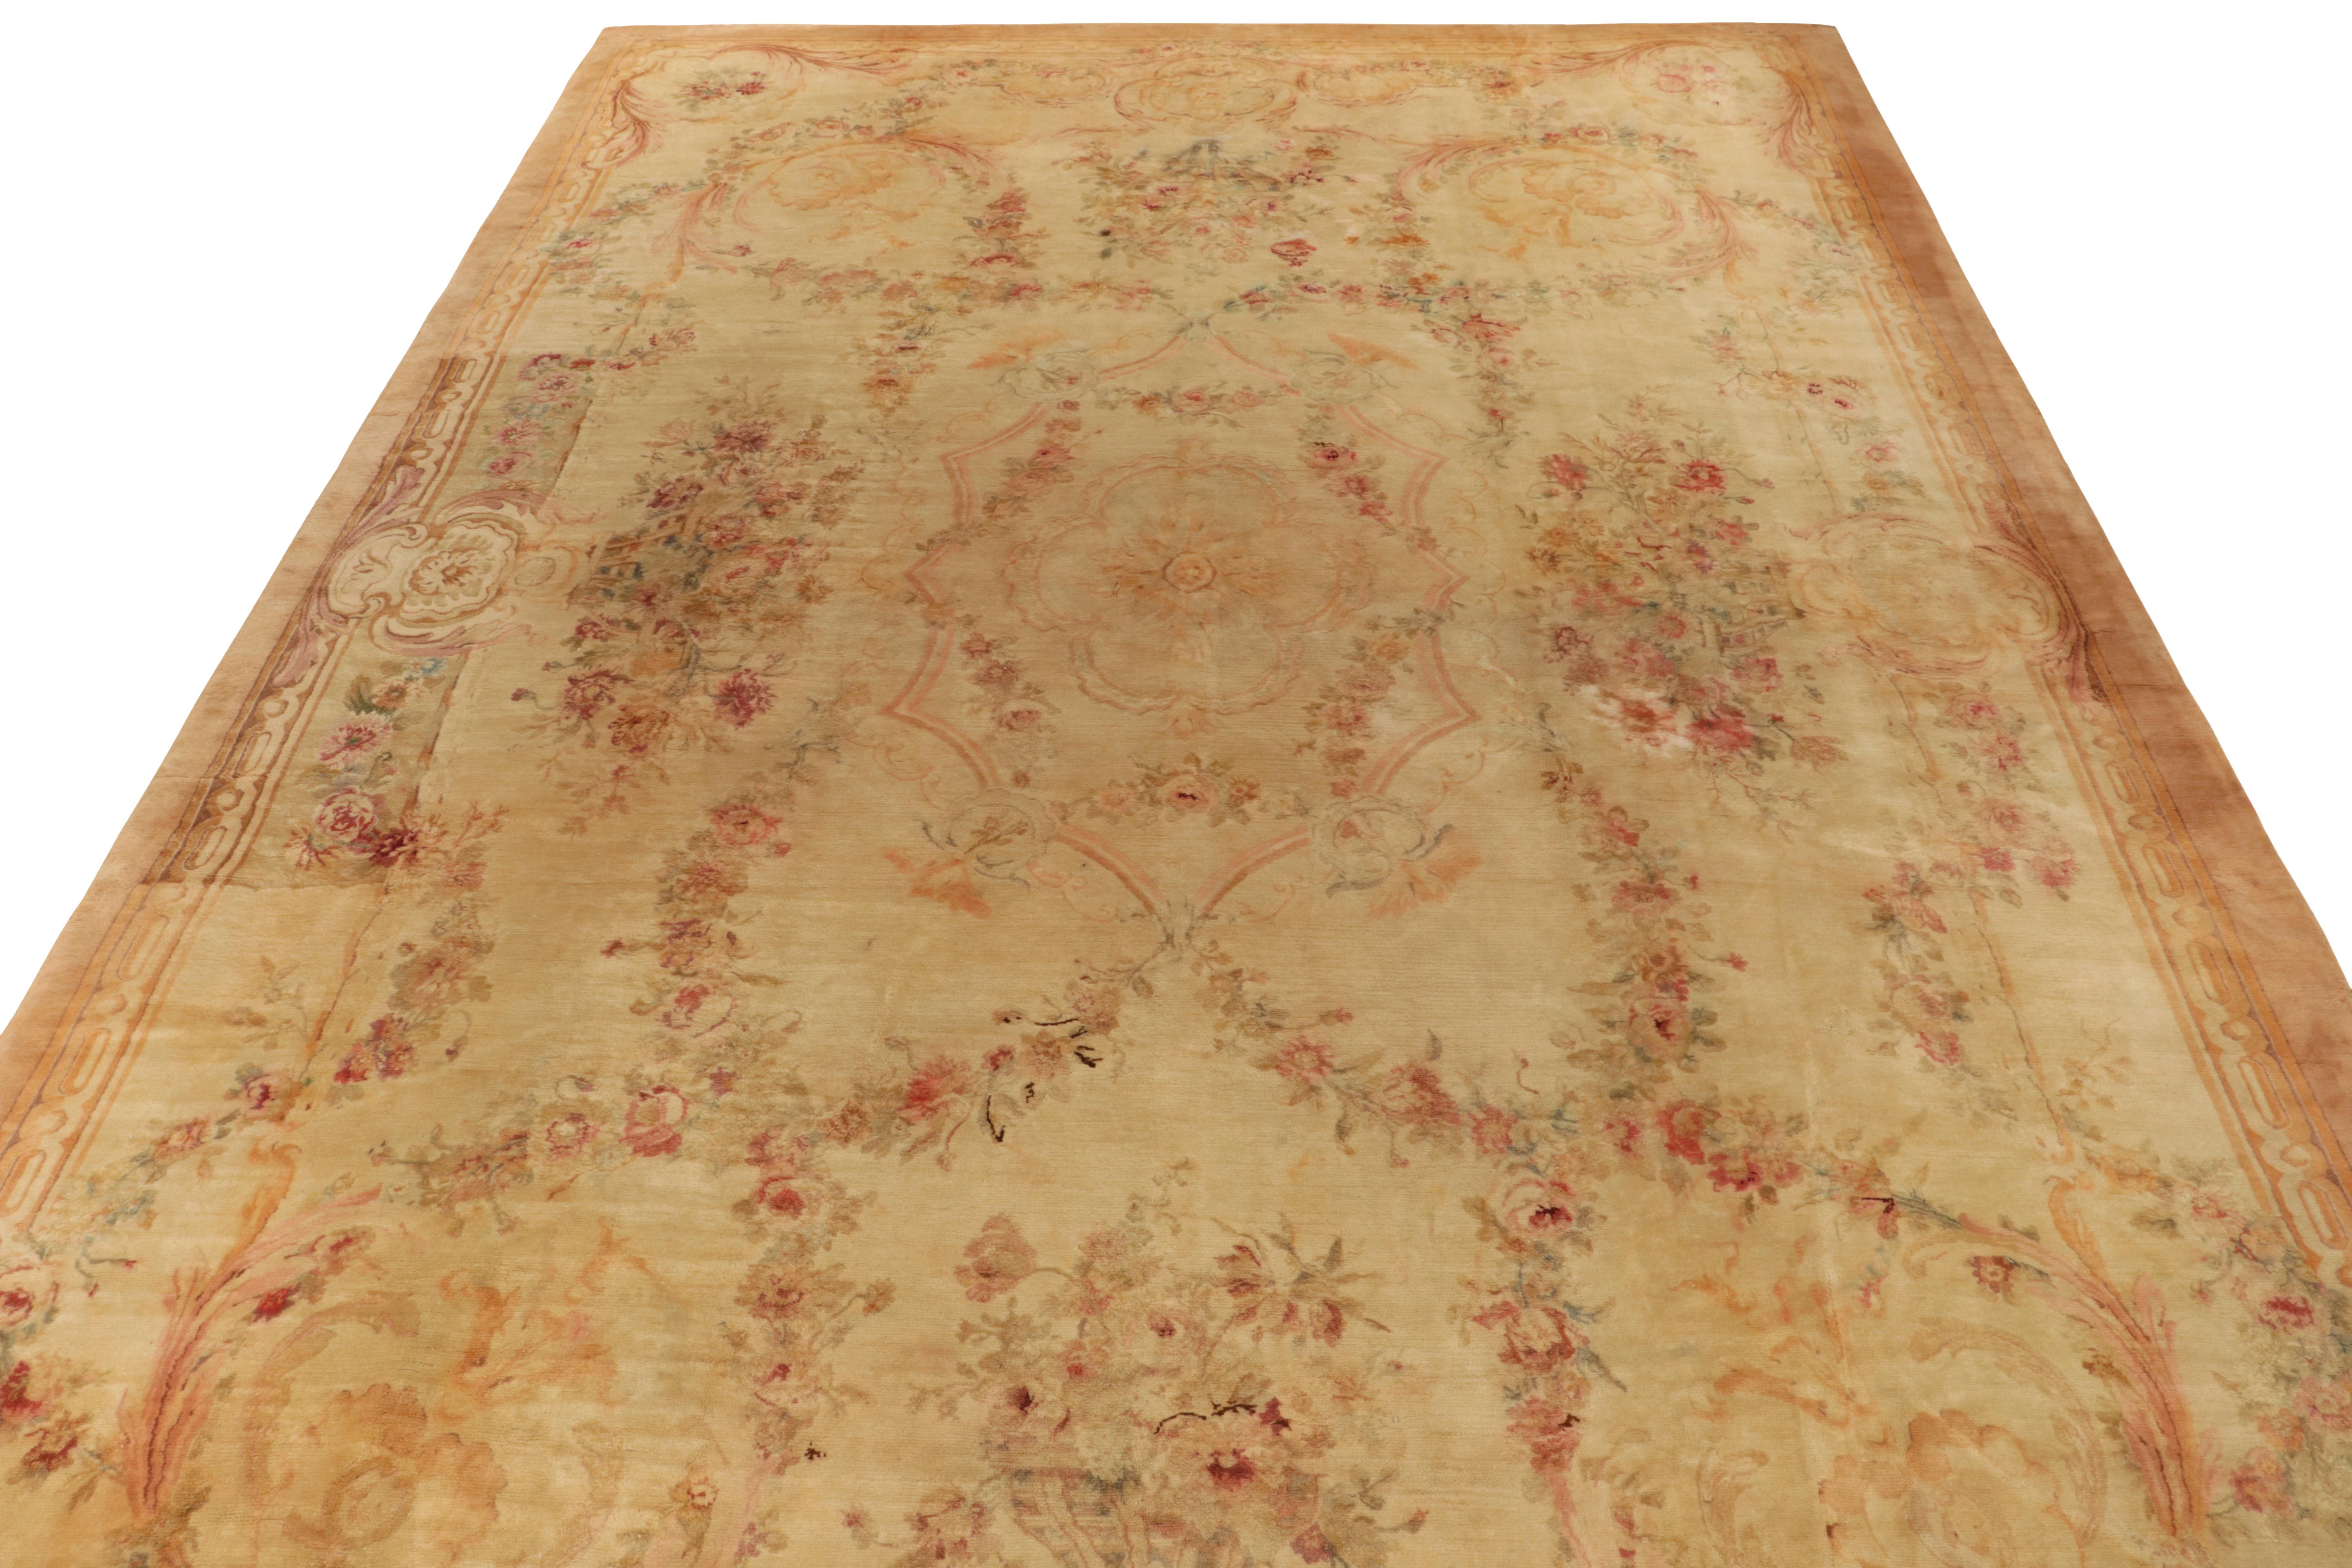 Hand-knotted in lush wool pile, this 14x22 antique Savonnerie rug exemplifies the impeccable French craftsmanship of the late 19th century. This classic style enjoys an expansive floral pattern in comforting beige & gold tones accenting to soft pink